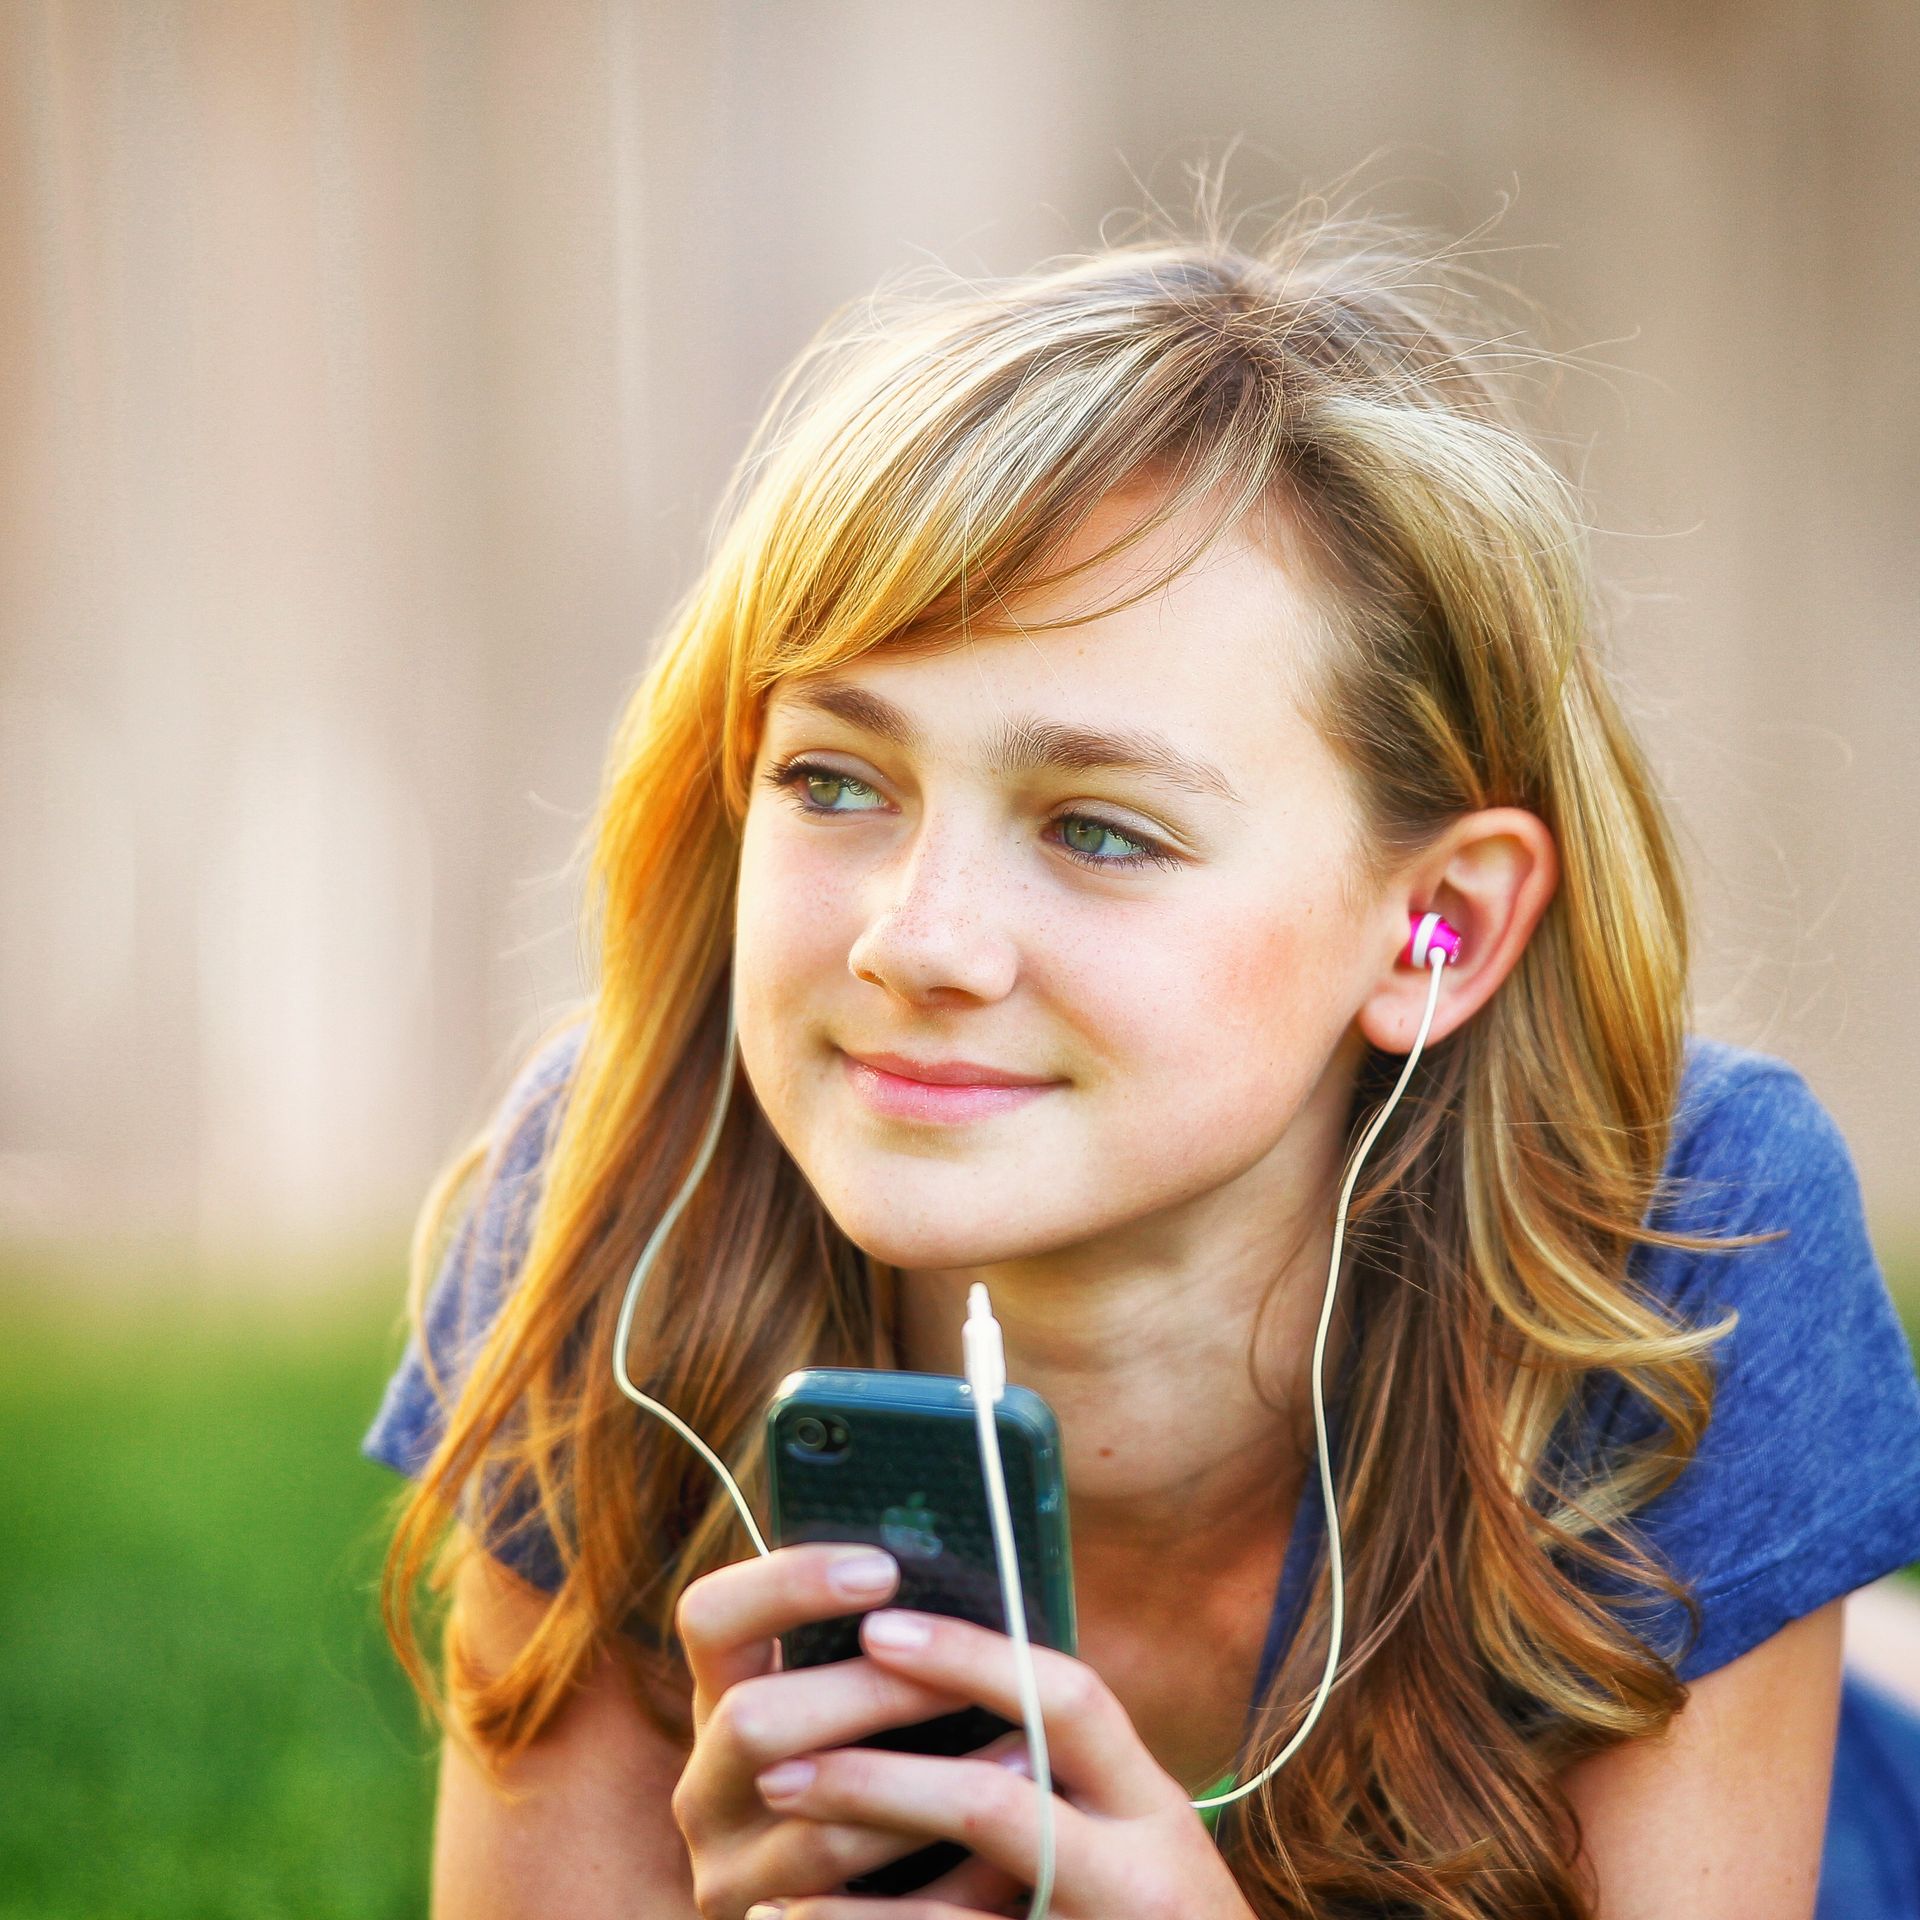 A young woman lies on the grass, listening to music through earbuds.